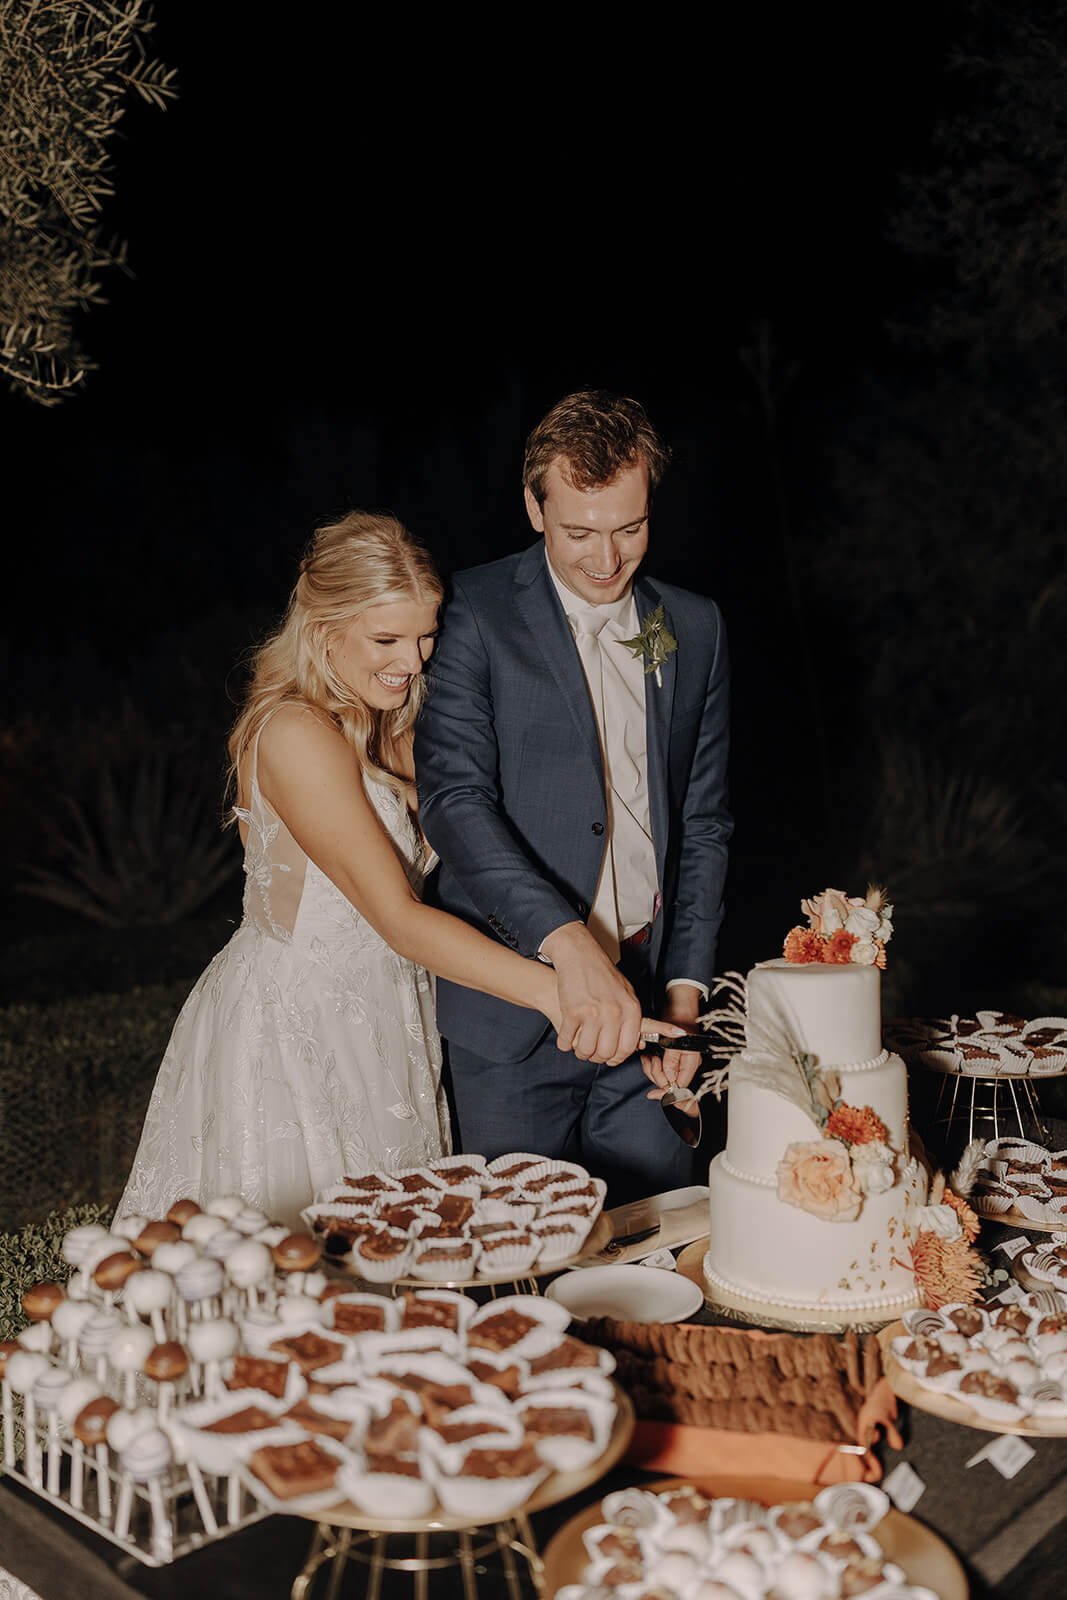 Bride and groom cut cake at outdoor evening wedding reception